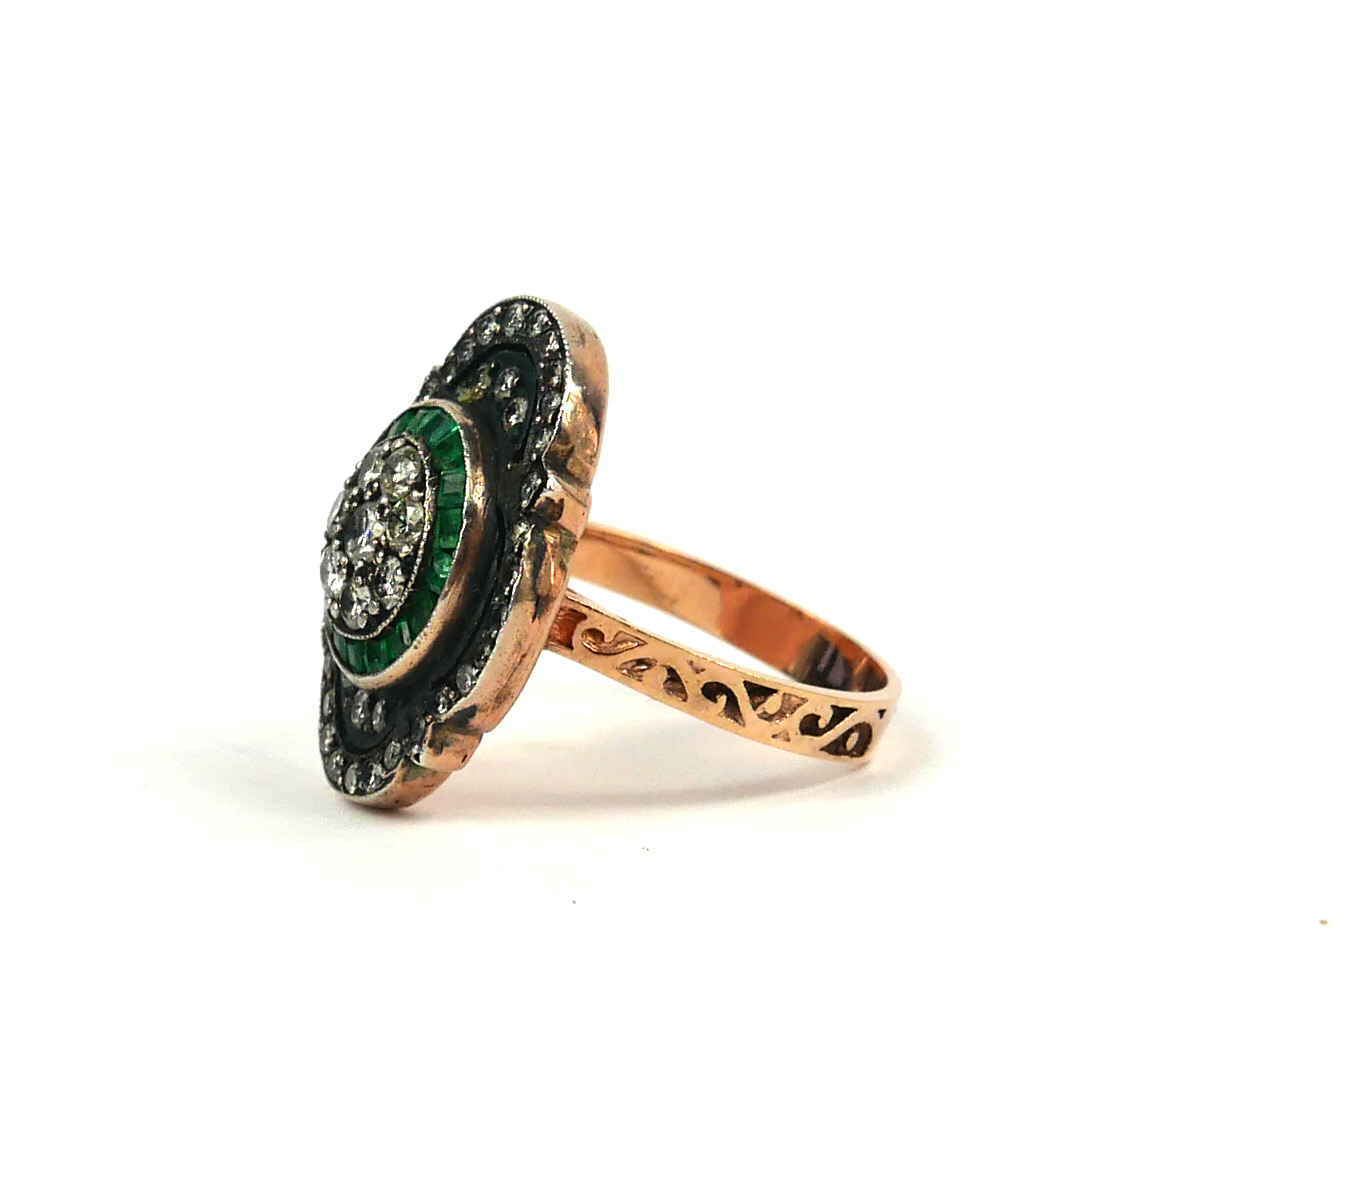 A VINTAGE STYLE 8CT ROSE GOLD (SILVER TOP) RING set with round diamonds and emeralds. - Image 2 of 3